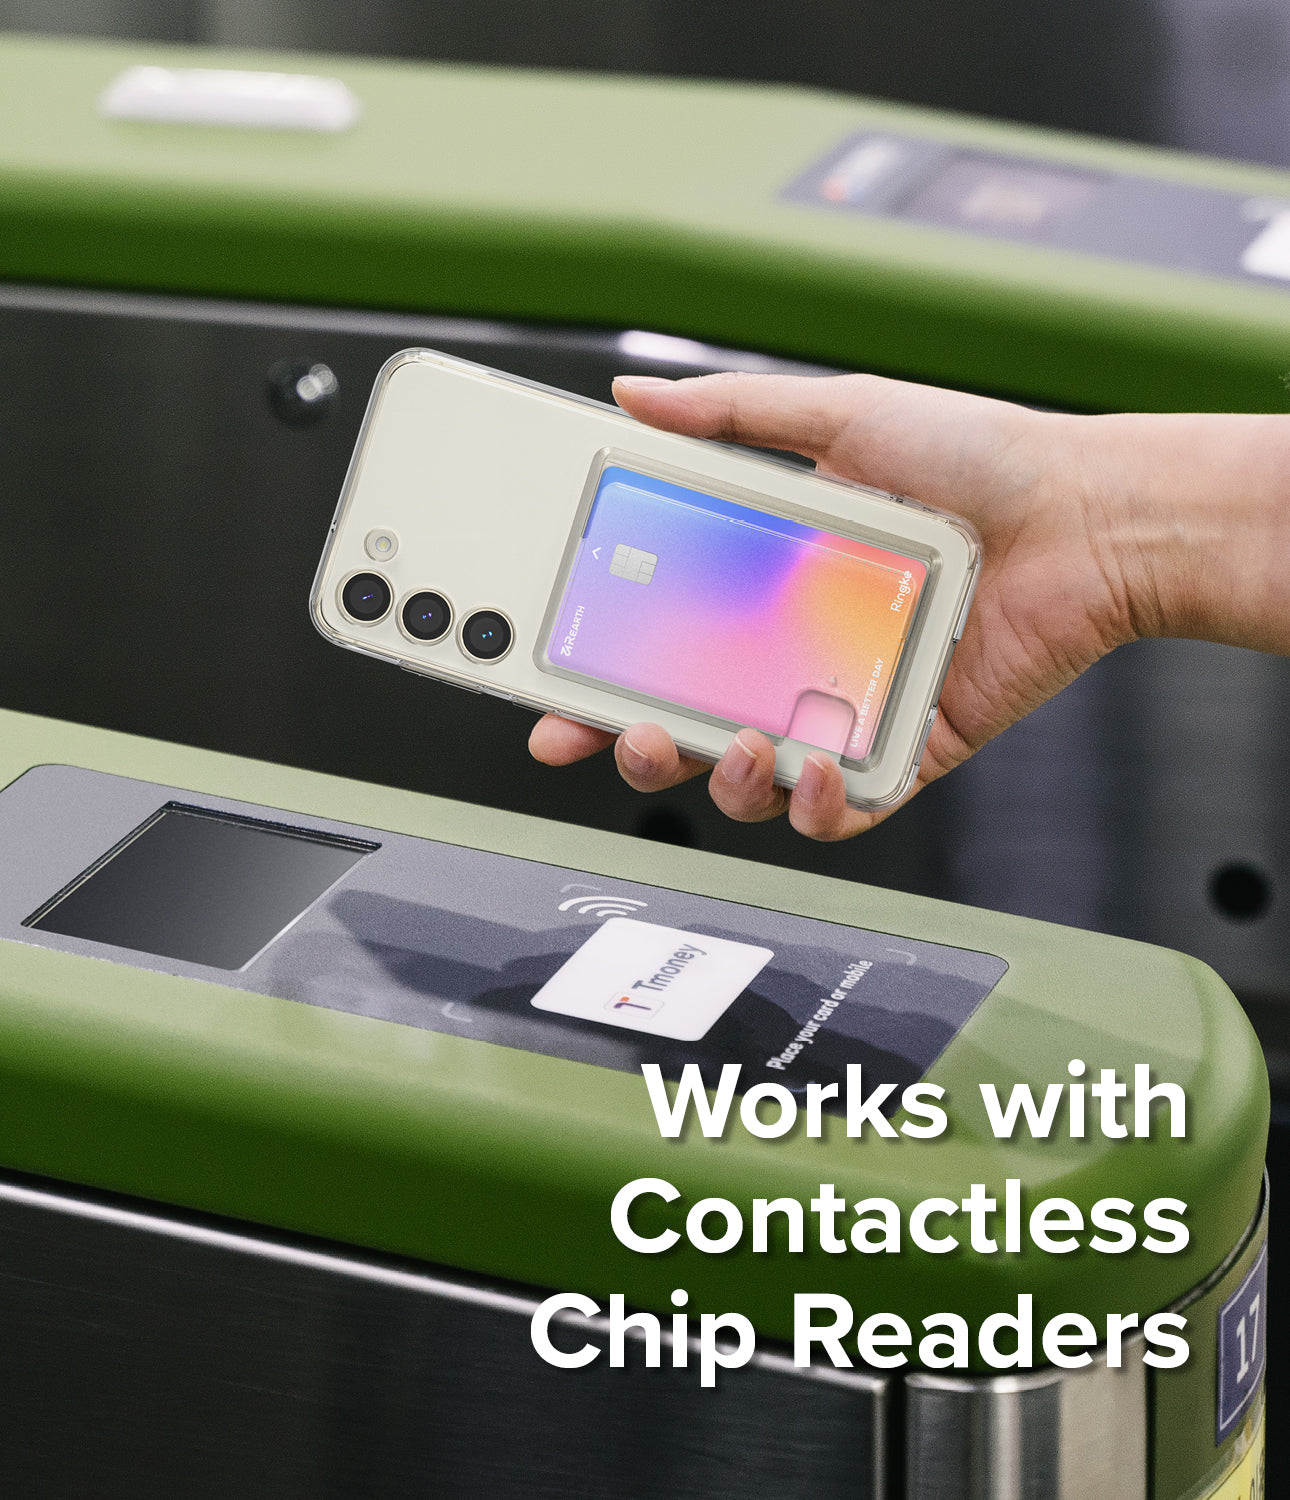 Works with Contactless Chip Readers